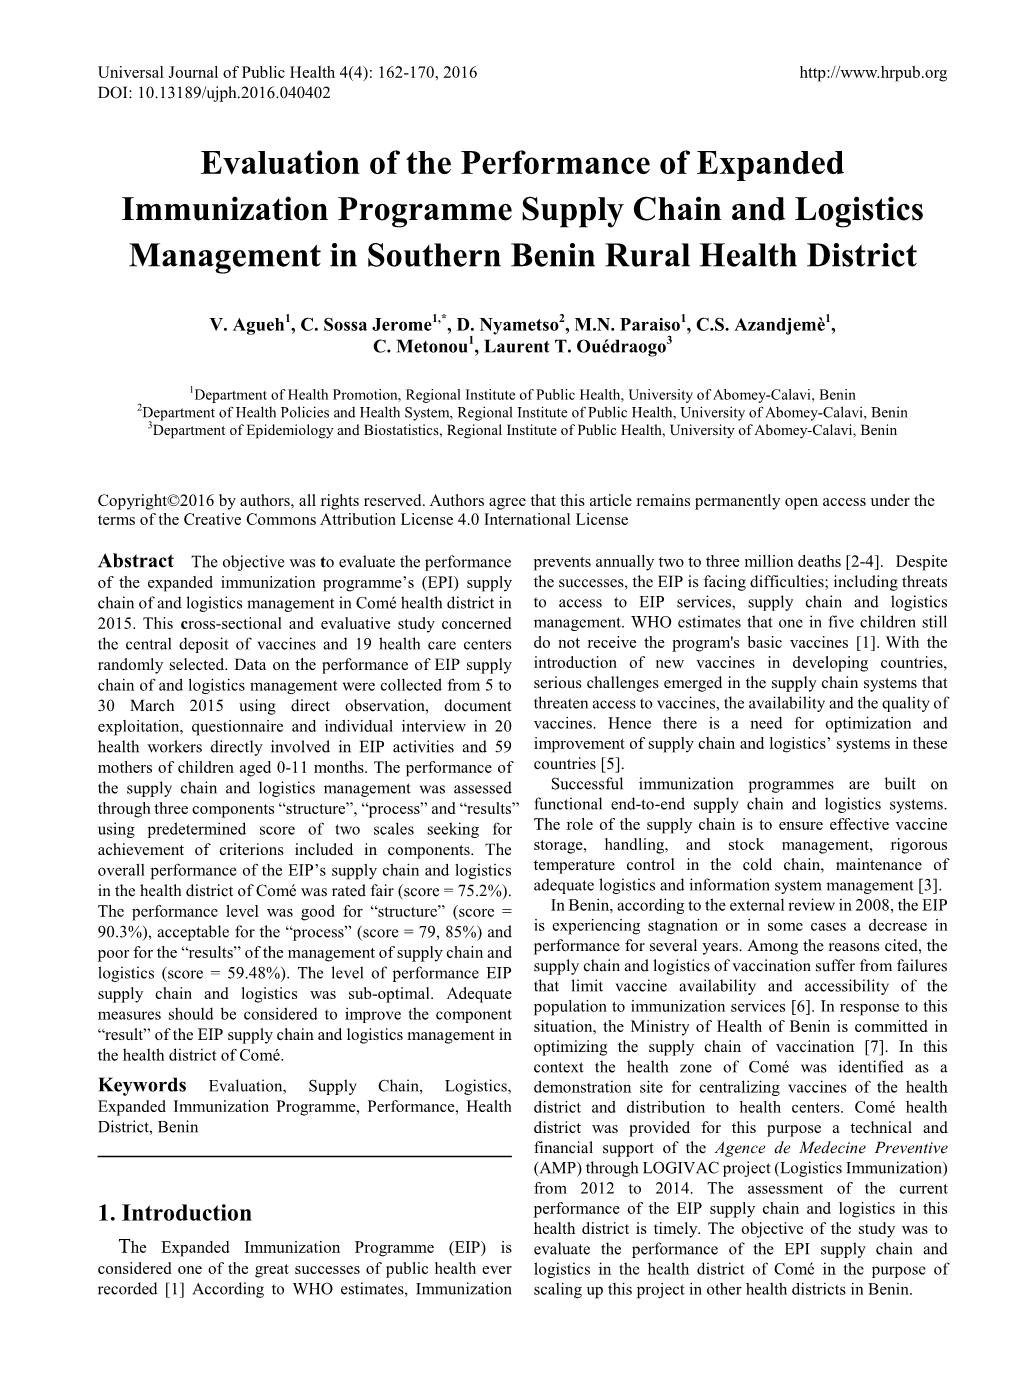 Evaluation of the Performance of Expanded Immunization Programme Supply Chain and Logistics Management in Southern Benin Rural Health District